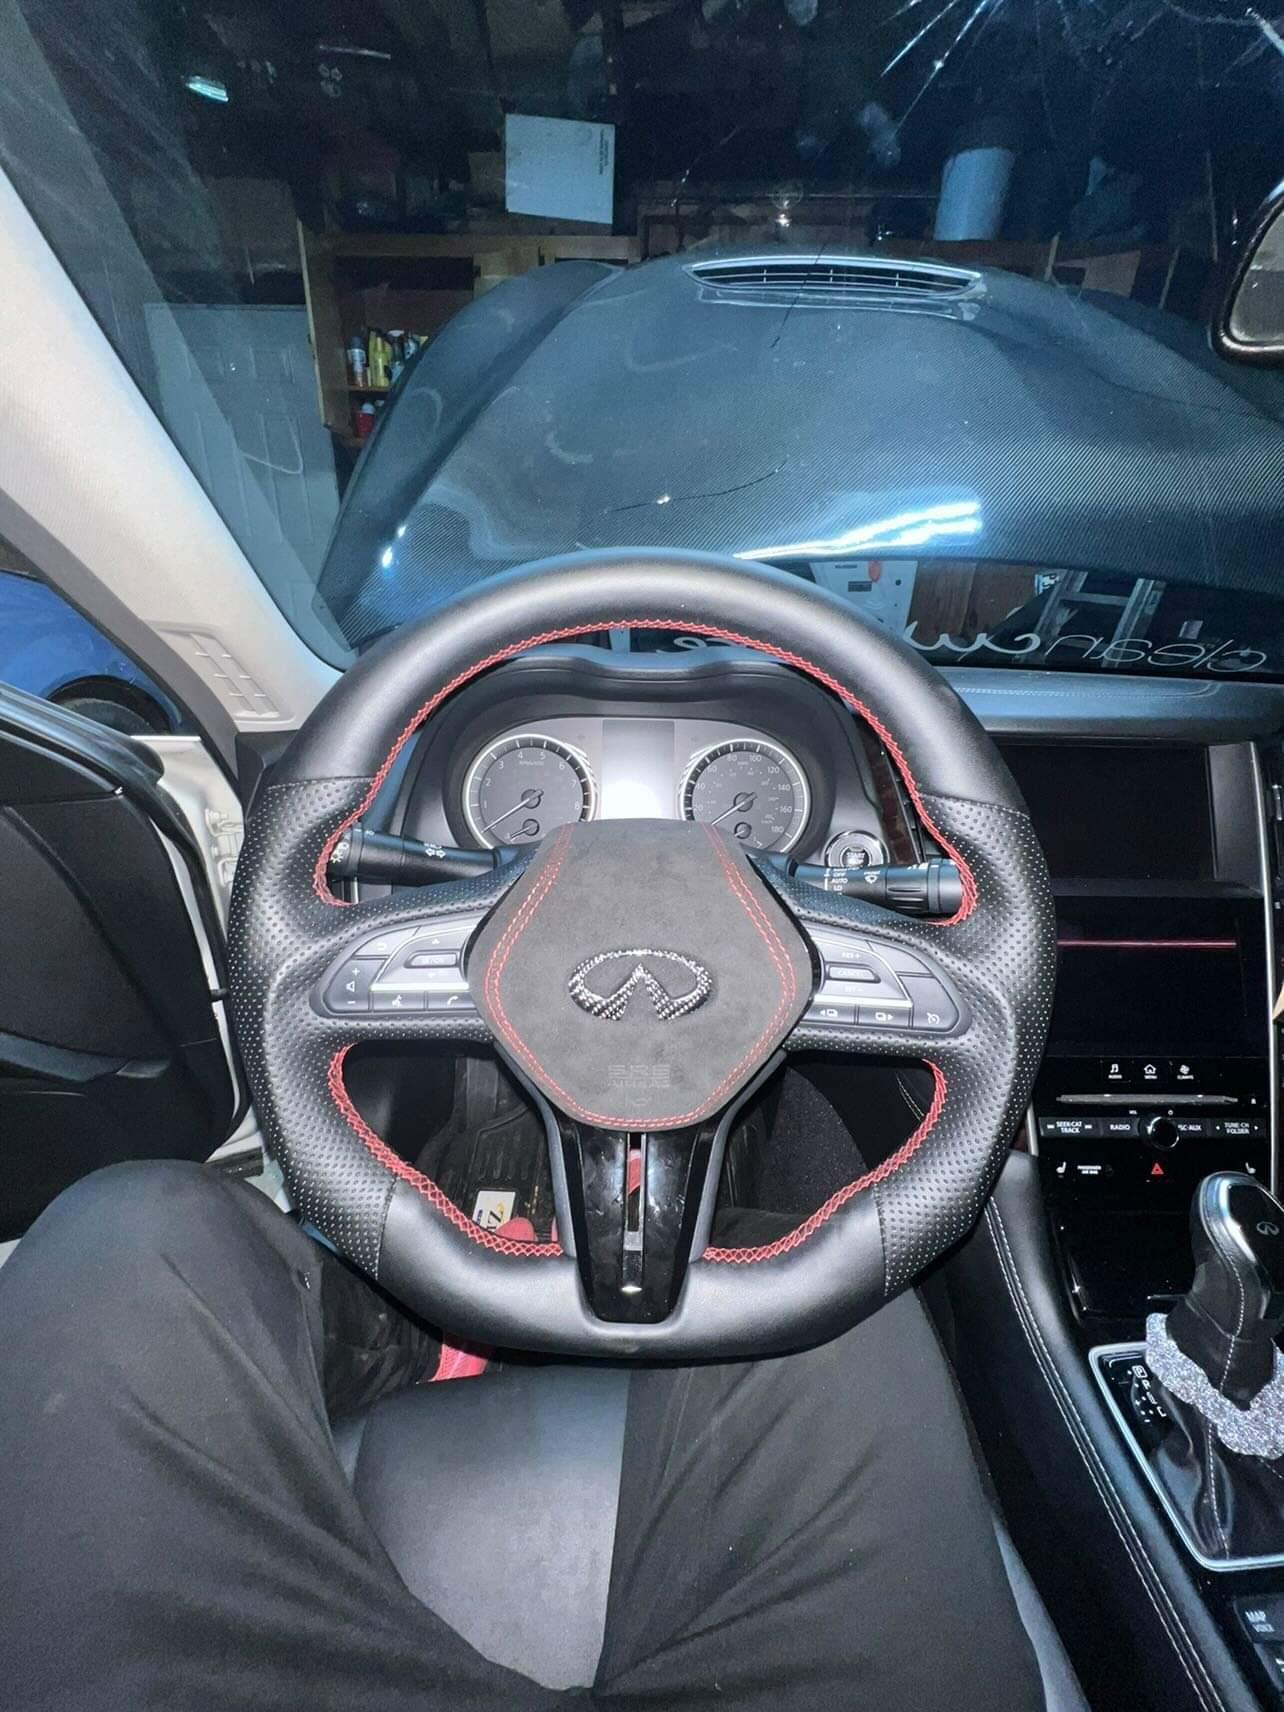 Jalisco's custom cover for the Infiniti Q50/Q60 steering wheel airbag: sleek black design accented with meticulous red stitching, emphasizing the precision and elegance of the customization